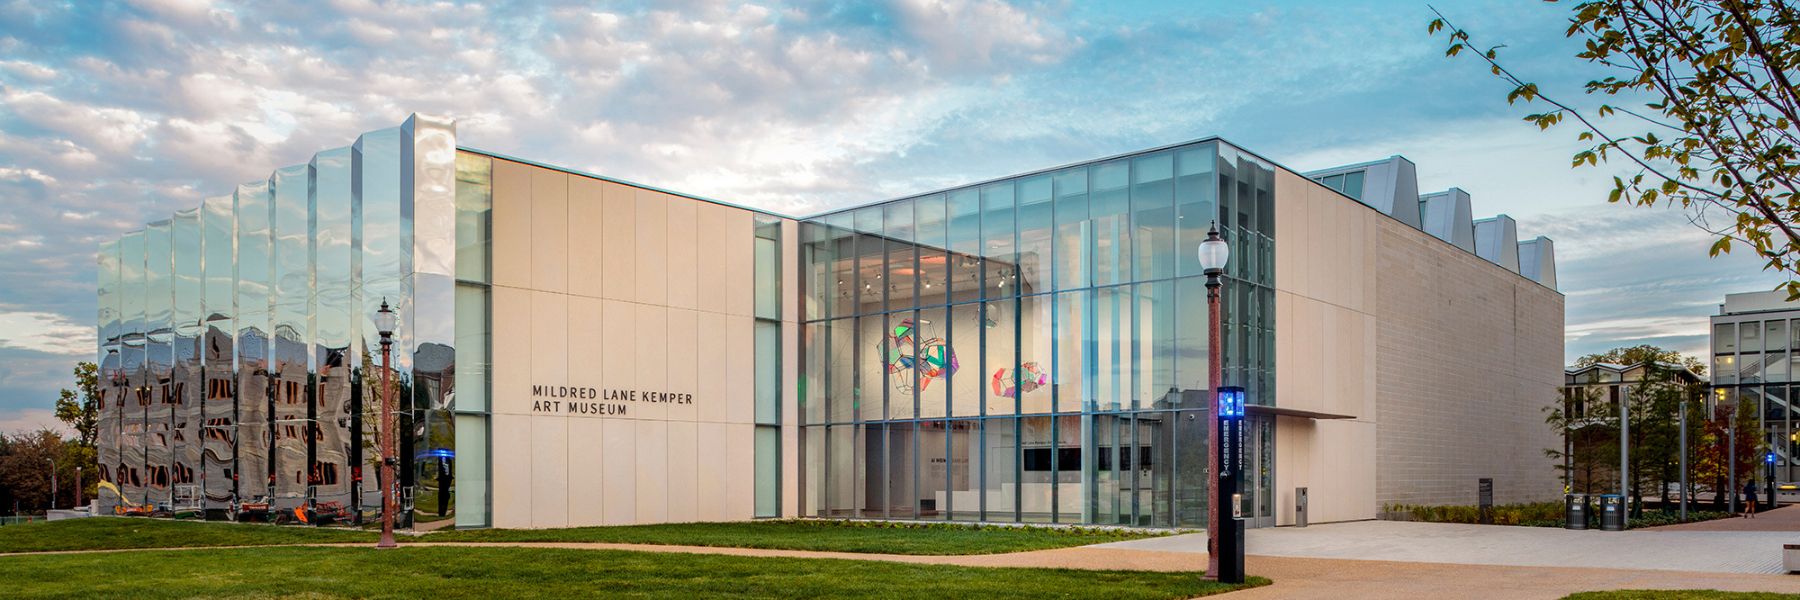 The Mildred Lane Kemper Art Museum houses modern and contemporary art on the campus of Washington University in St. Louis.